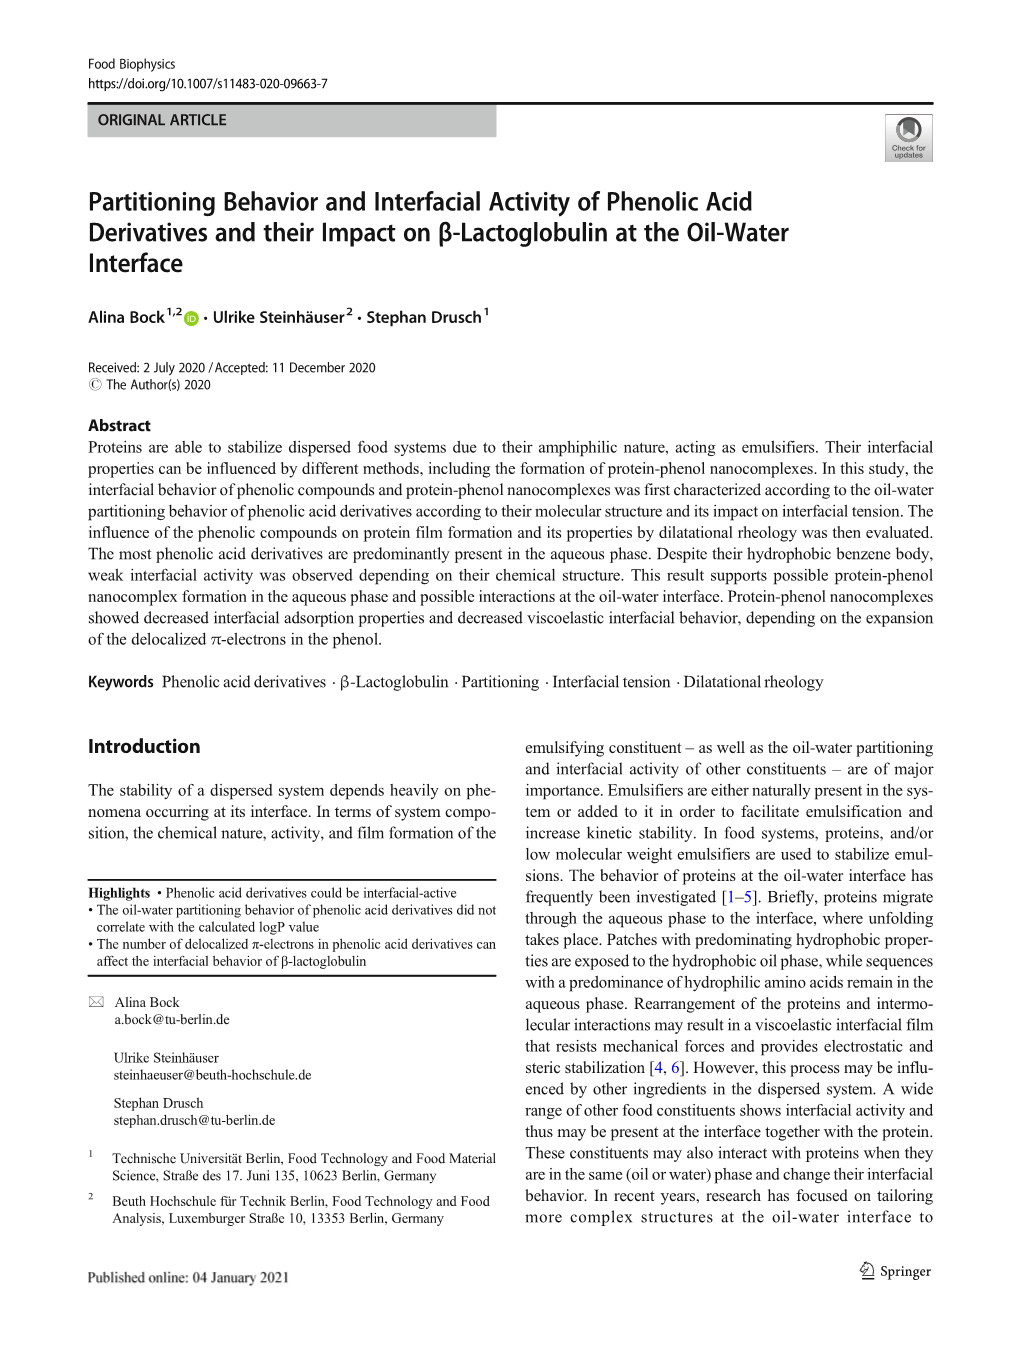 Partitioning Behavior and Interfacial Activity of Phenolic Acid Derivatives and Their Impact on Β-Lactoglobulin at the Oil-Water Interface